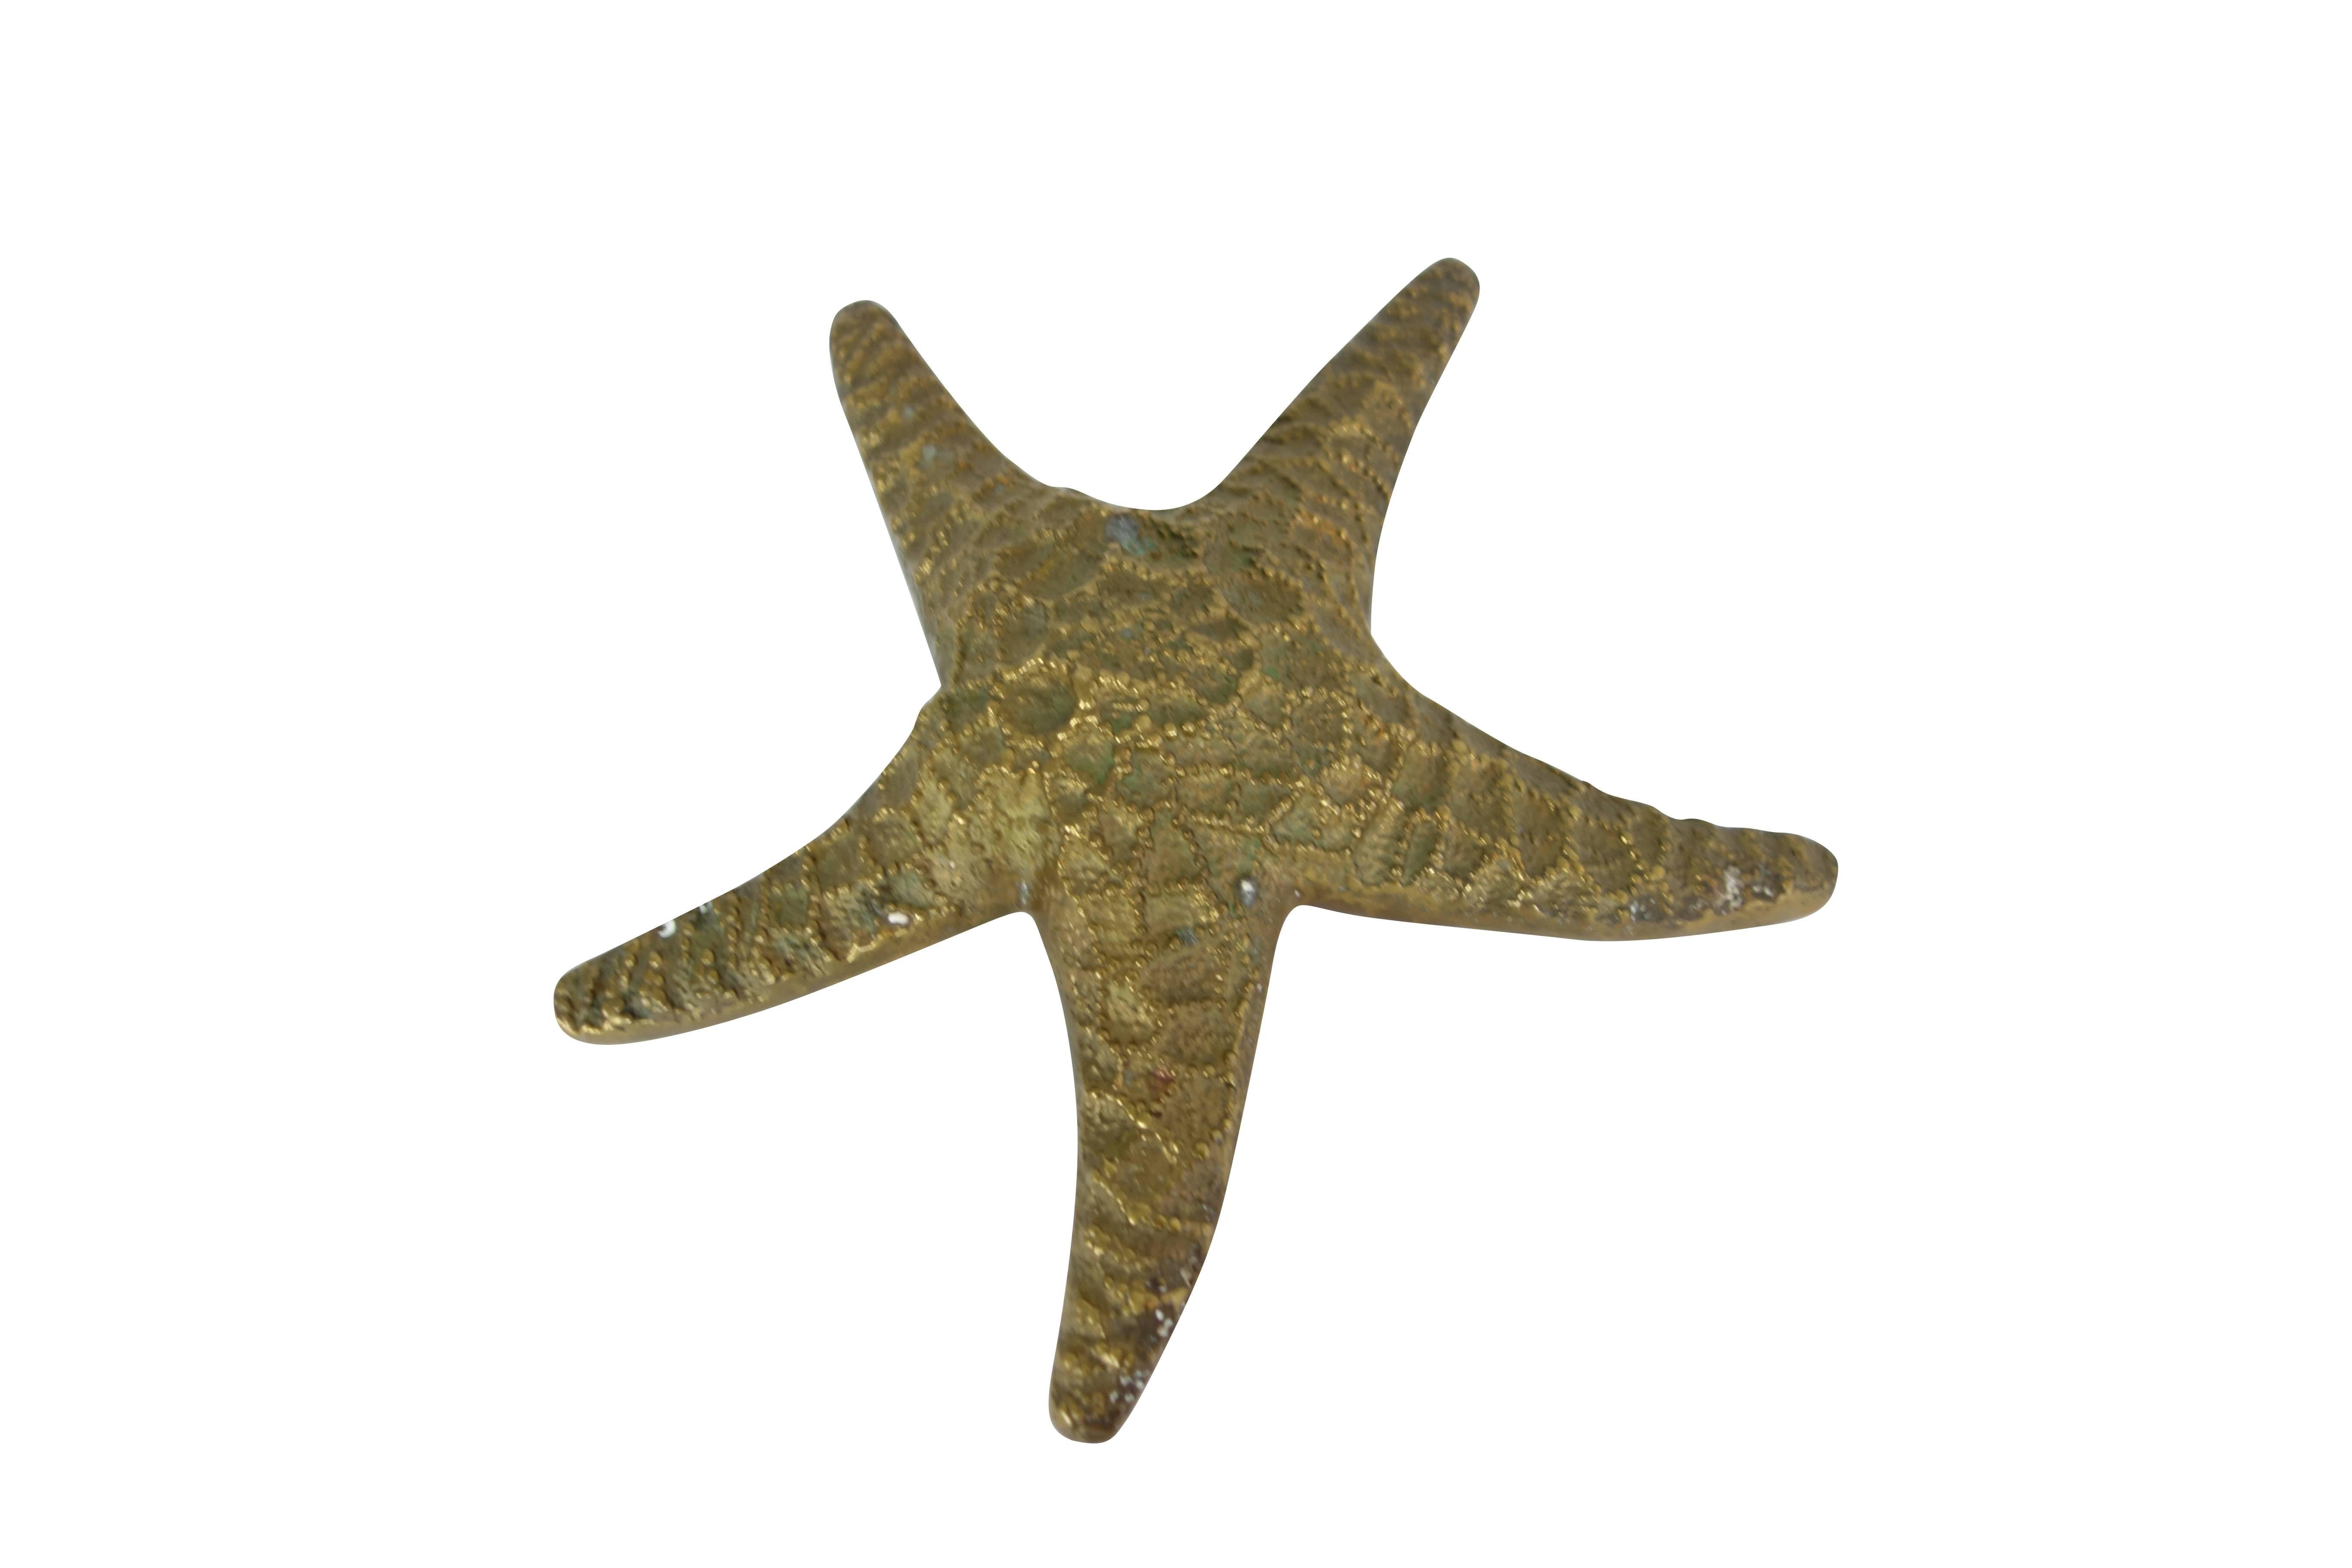 This is a vintage cast brass starfish.